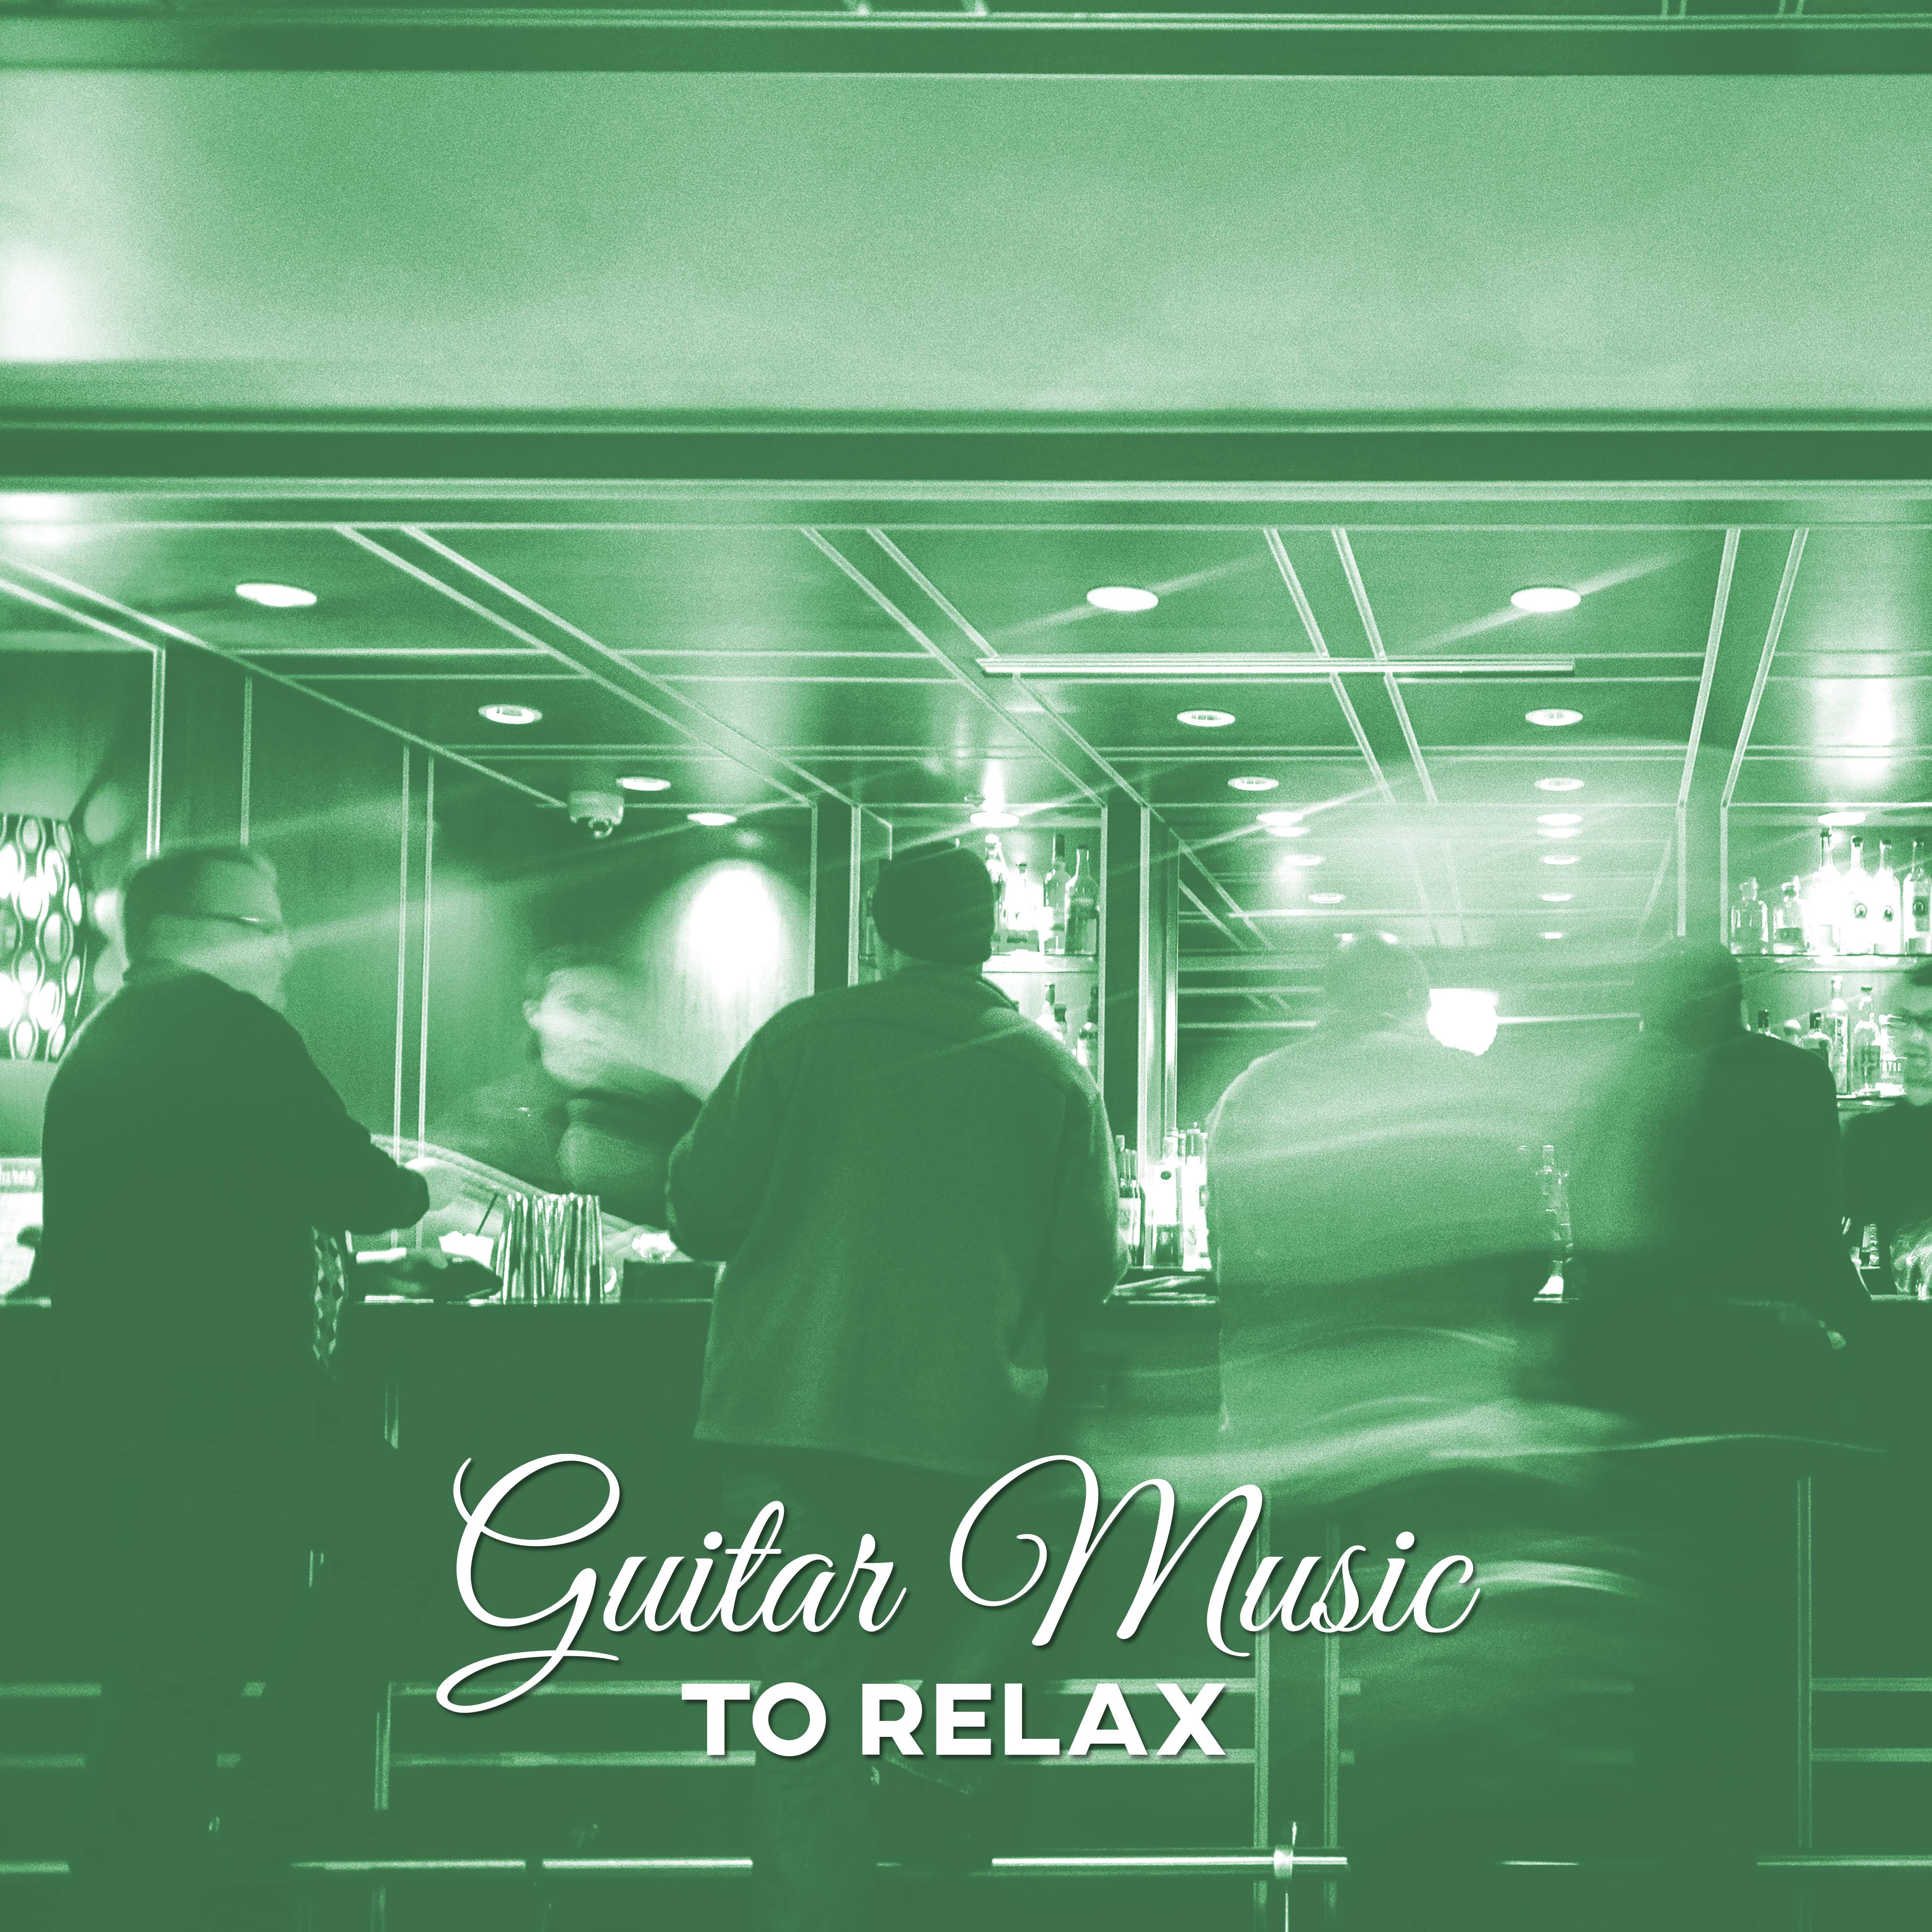 Guitar Music to Relax – Soft Jazz, Mellow Guitar, Smooth Sounds to Relax, Evening Shadows